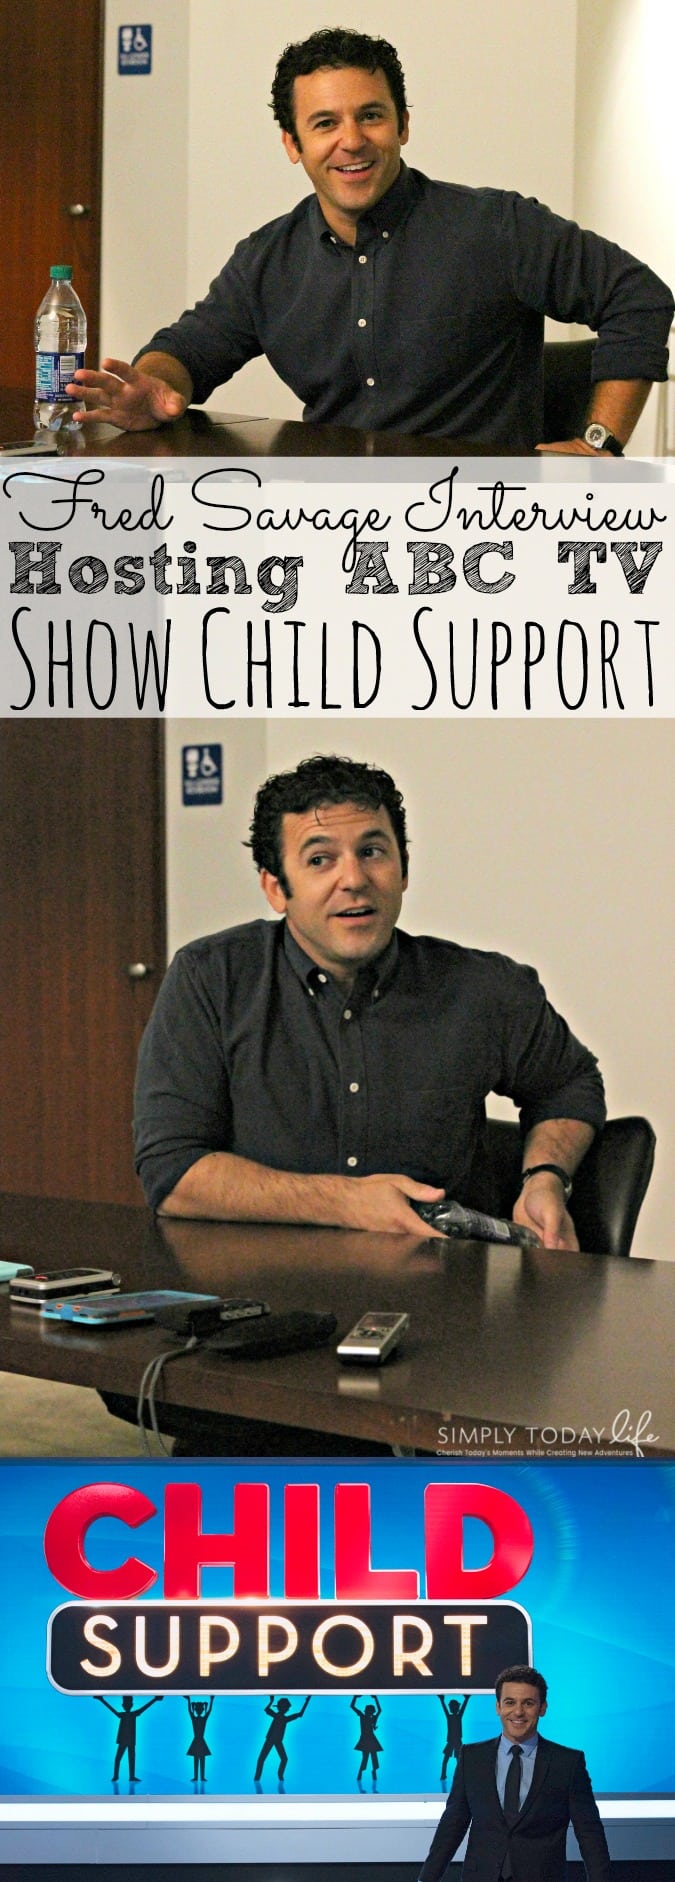 Fred Savage Interview Hosting ABC TV Show Child Support - simplytodaylife.com